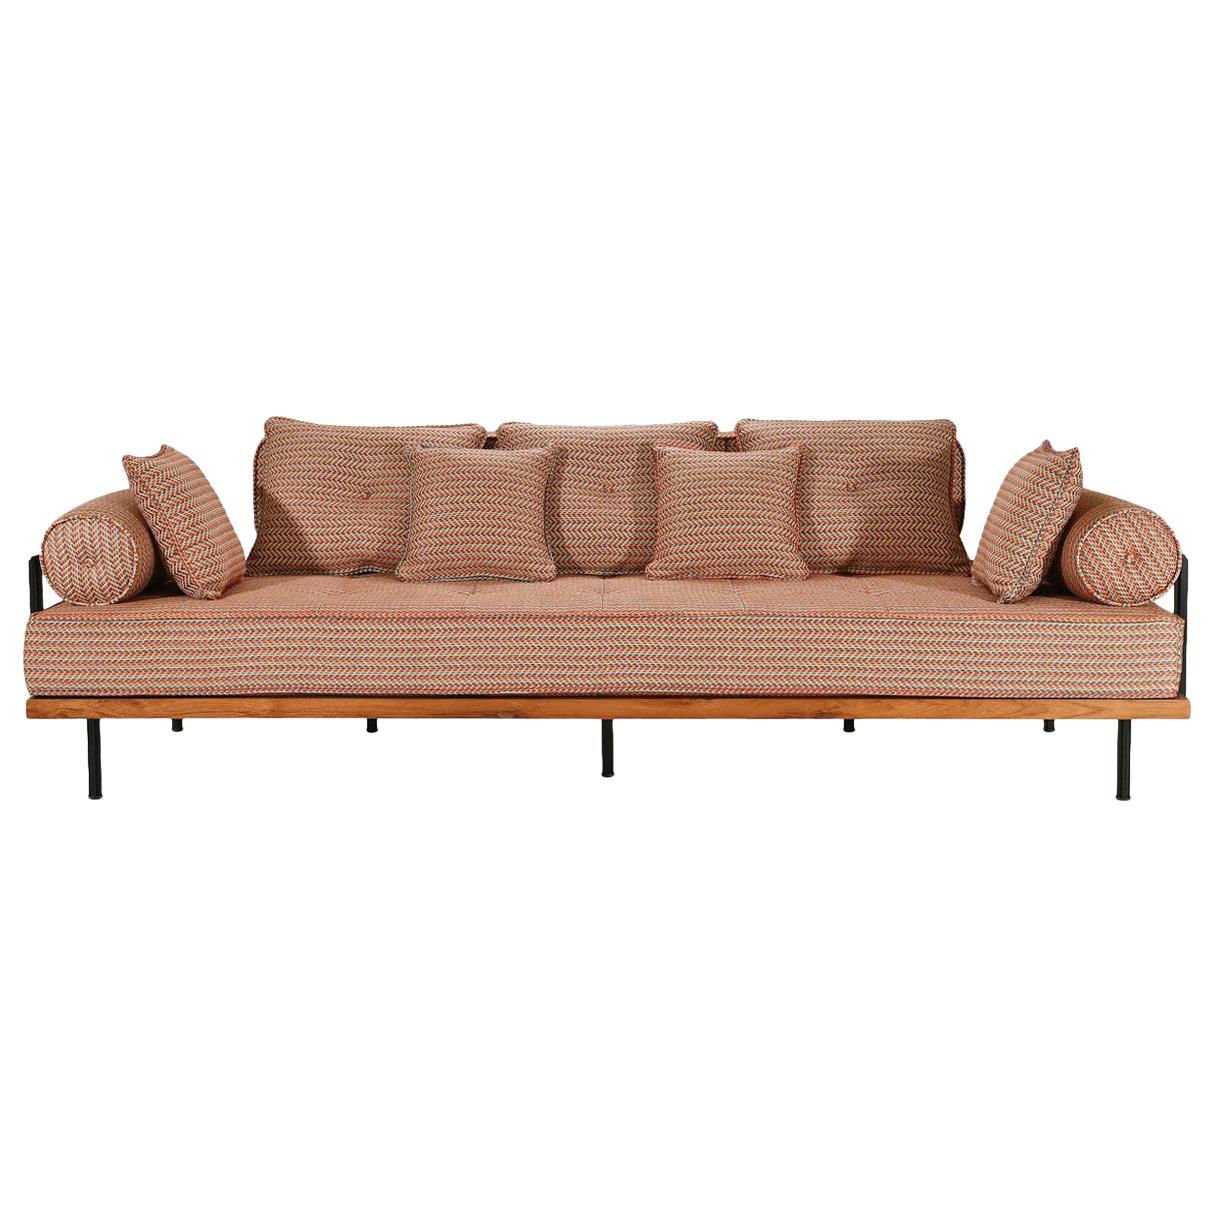 Bespoke 3 Seater Sofa with Solid Brass and Reclaimed Hardwood by P. Tendercool For Sale